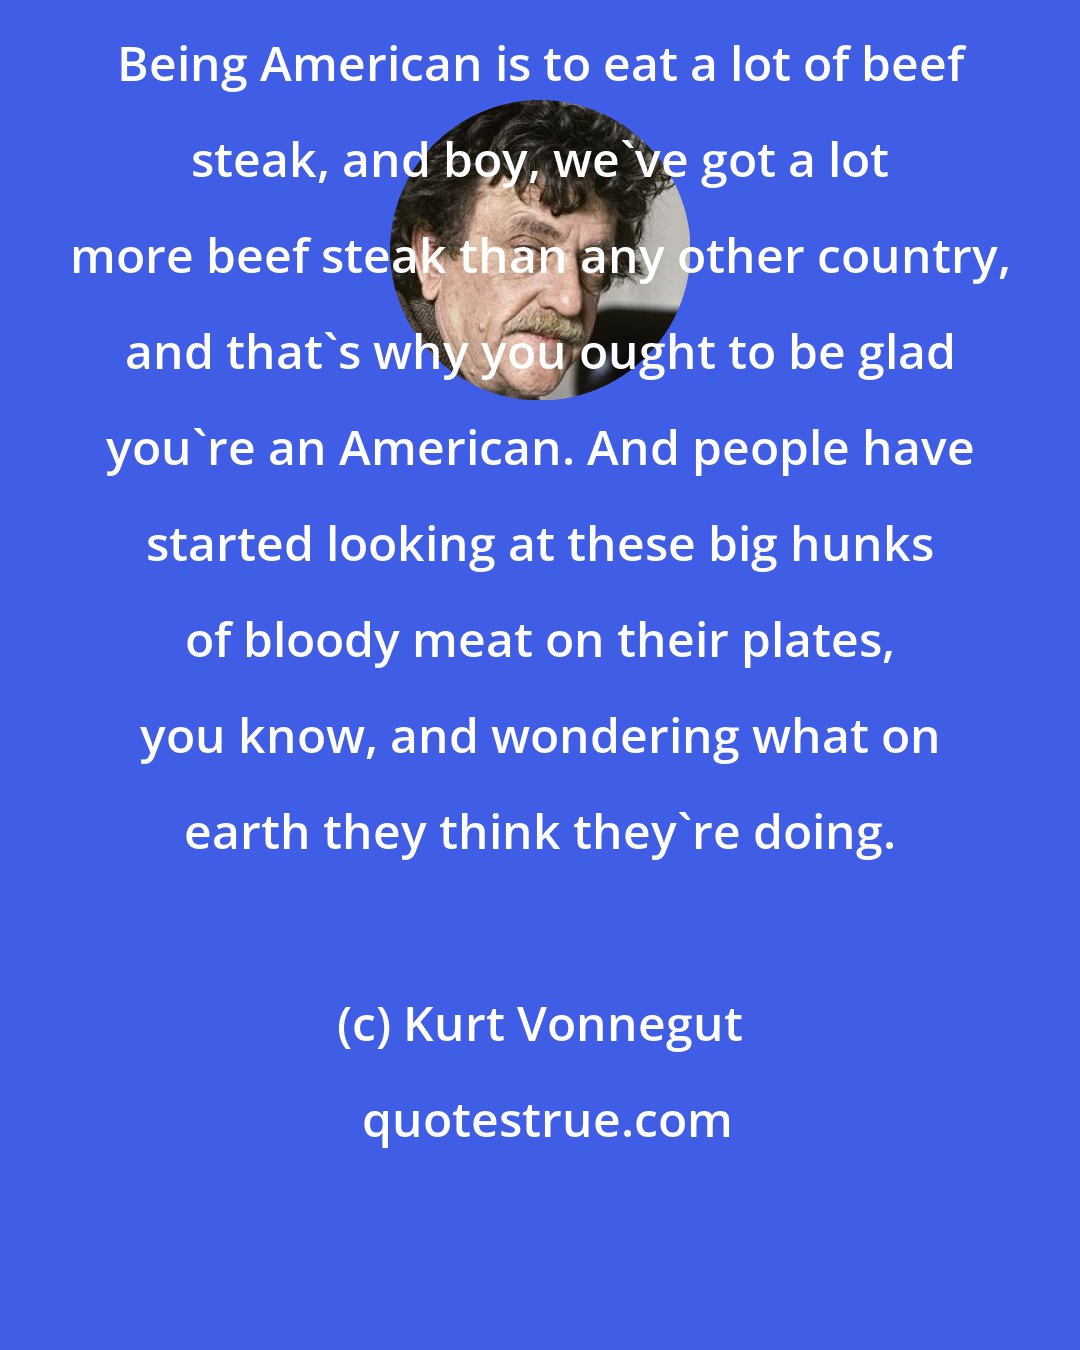 Kurt Vonnegut: Being American is to eat a lot of beef steak, and boy, we've got a lot more beef steak than any other country, and that's why you ought to be glad you're an American. And people have started looking at these big hunks of bloody meat on their plates, you know, and wondering what on earth they think they're doing.